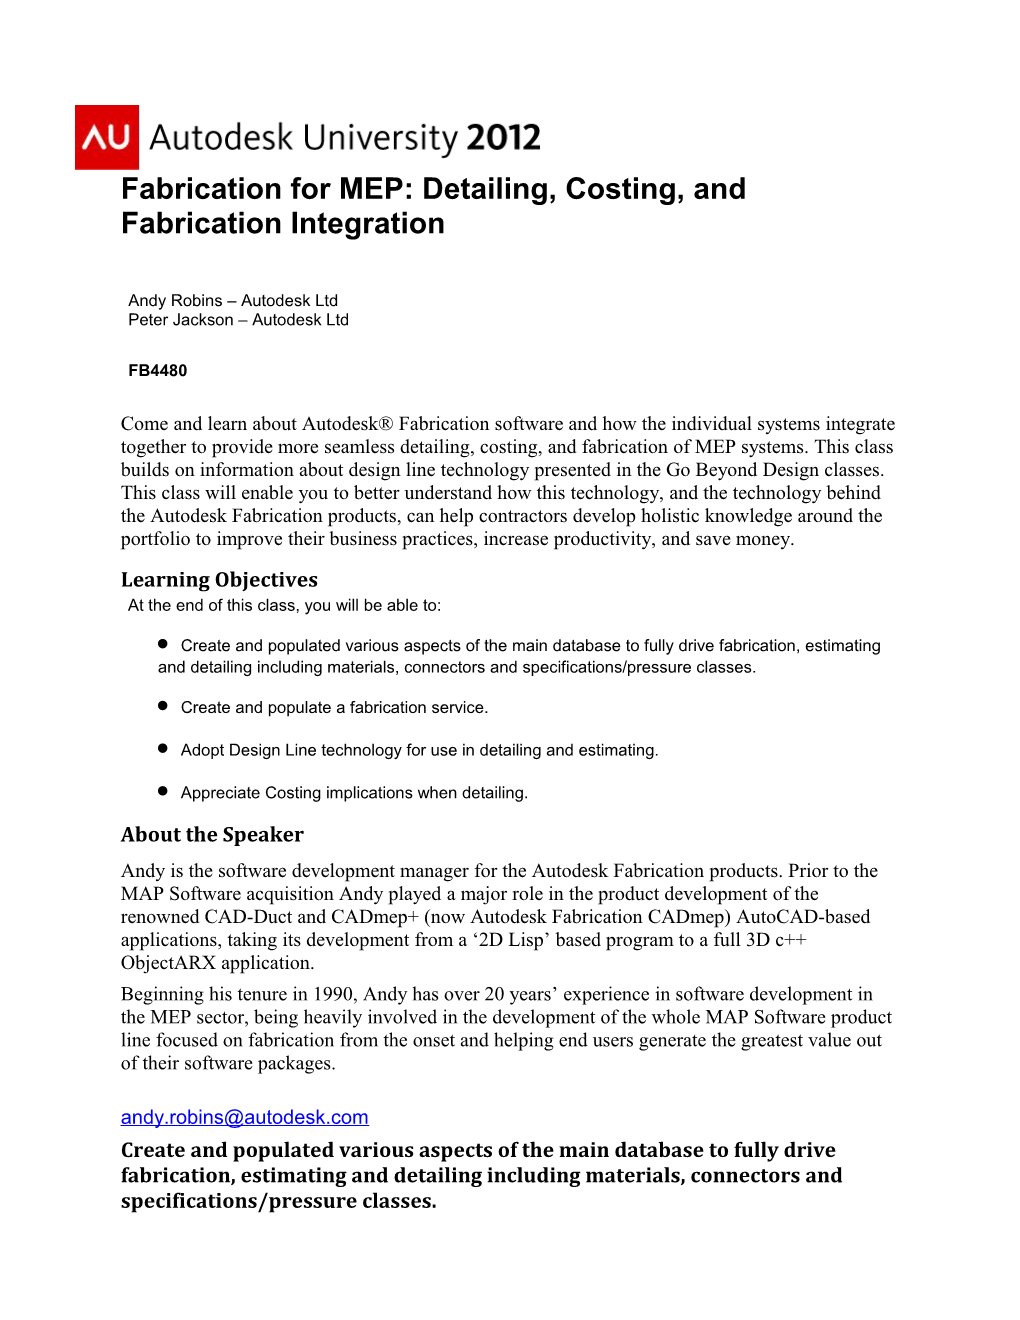 Fabrication for MEP: Detailing, Costing, and Fabrication Integration